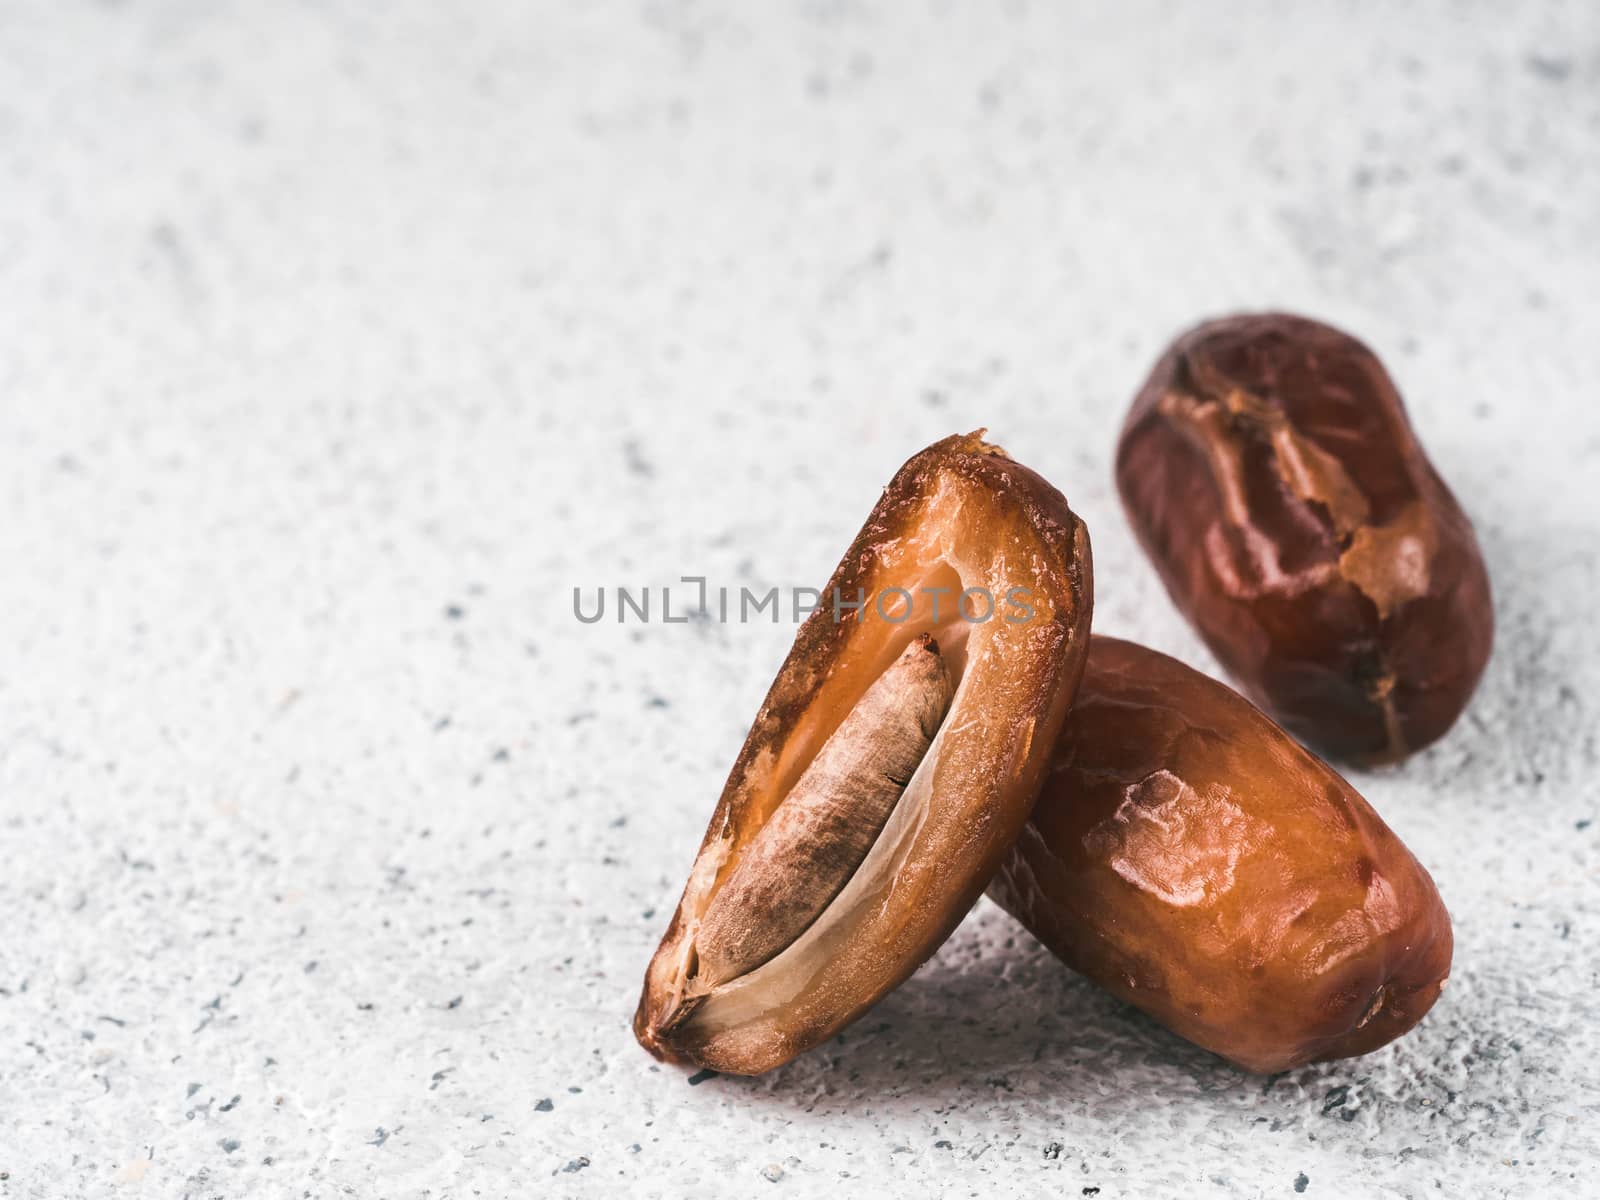 Sweet raw dates on gray cement background. Whole dates and half with bone date on grey concrete surface. Sugar free alternatives concept with space for text. Extreme close up view